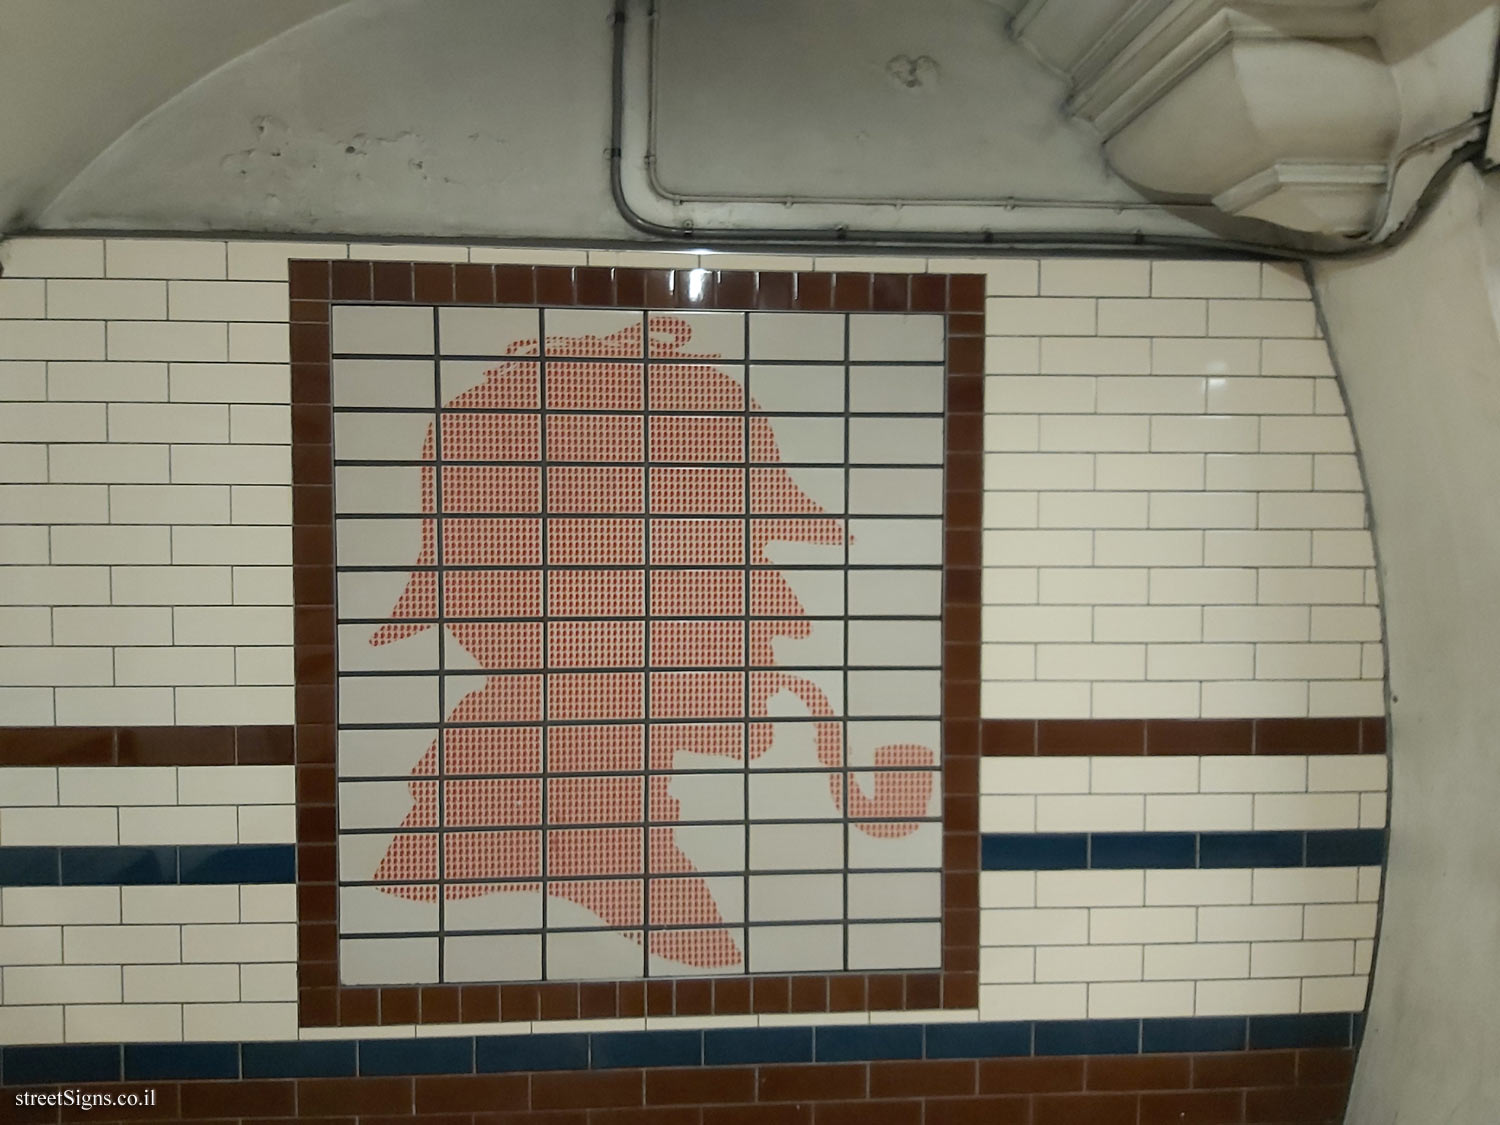 London - Baker Street Subway Station - Interior of the station - the silhouette of Sherlock Holmes